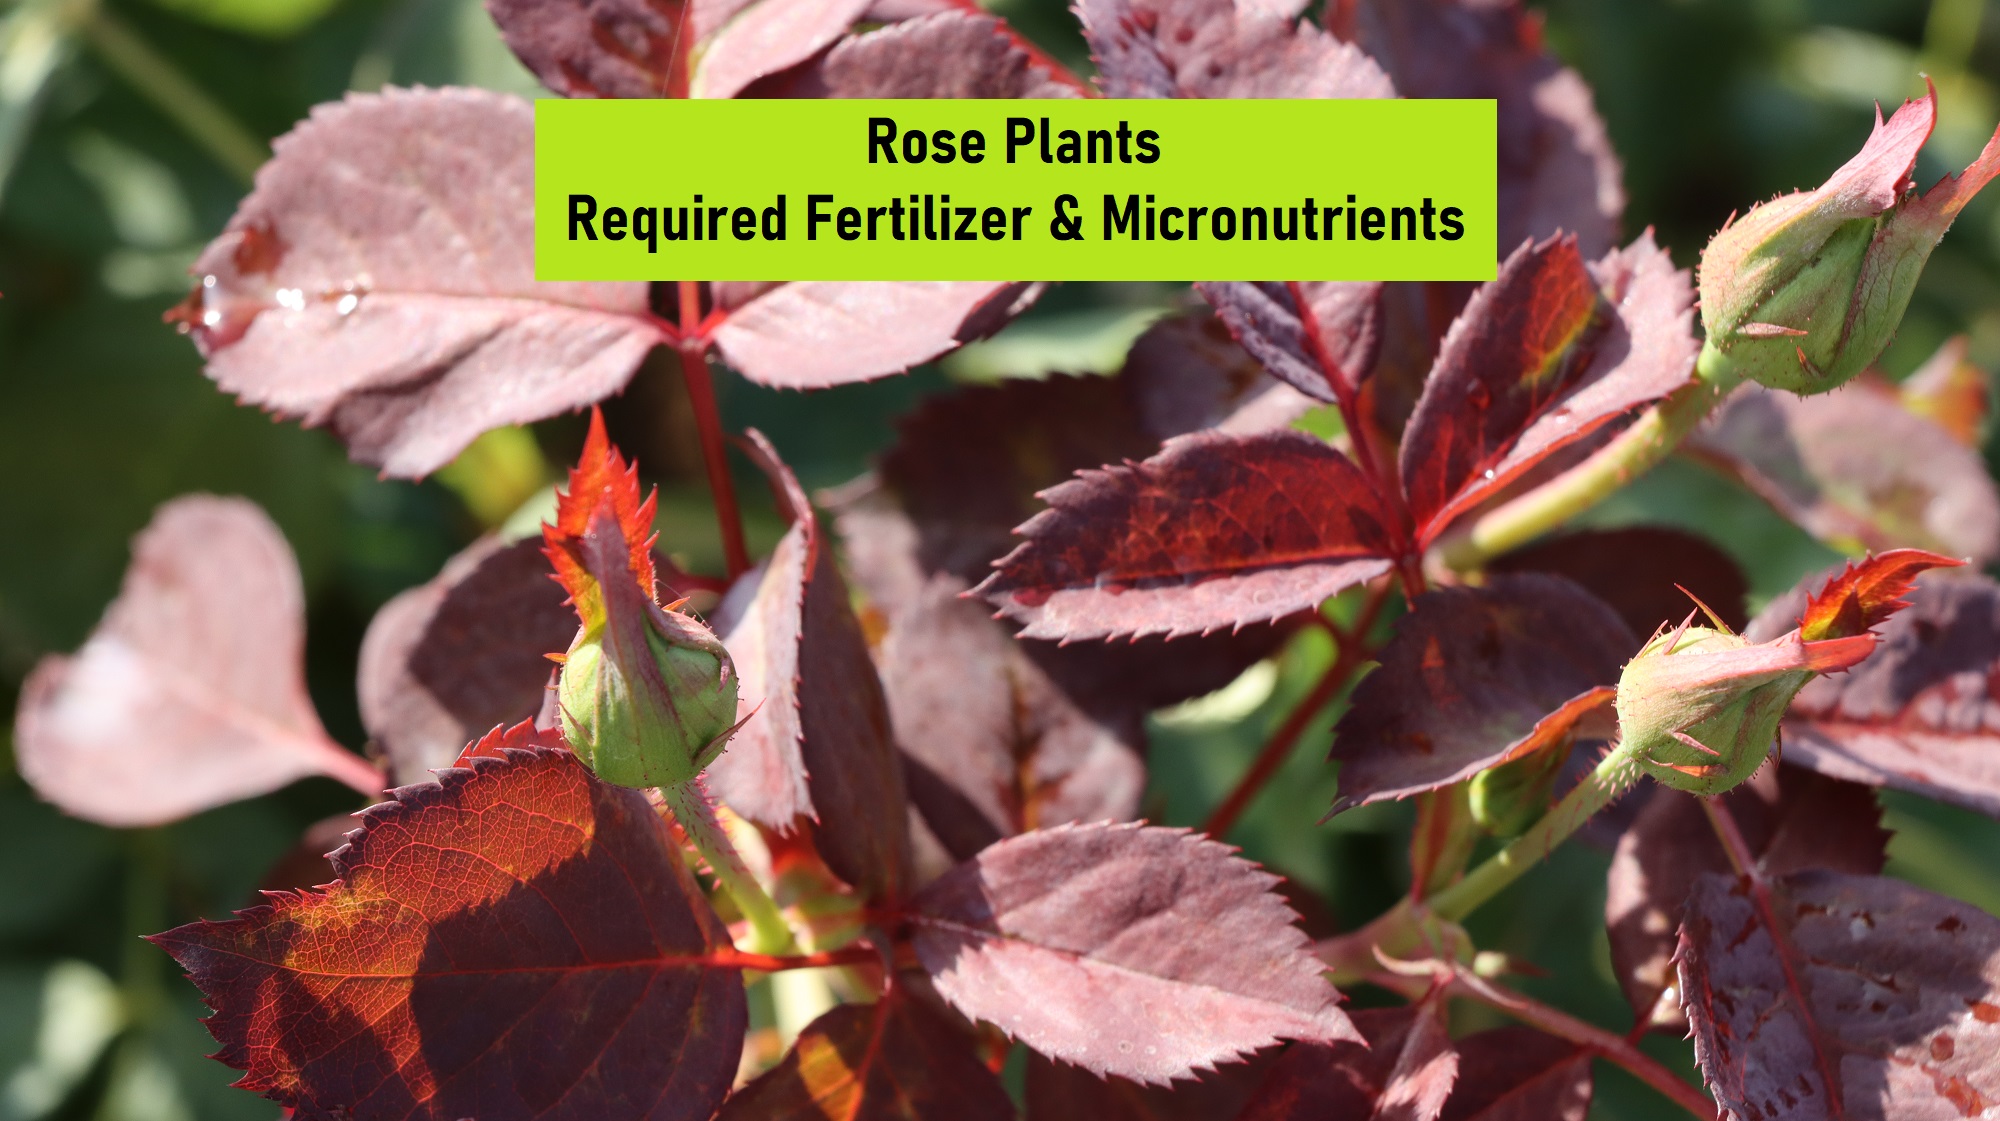 20 MCQs centered on the required Fertilizer and Micronutrients for Rose Plants